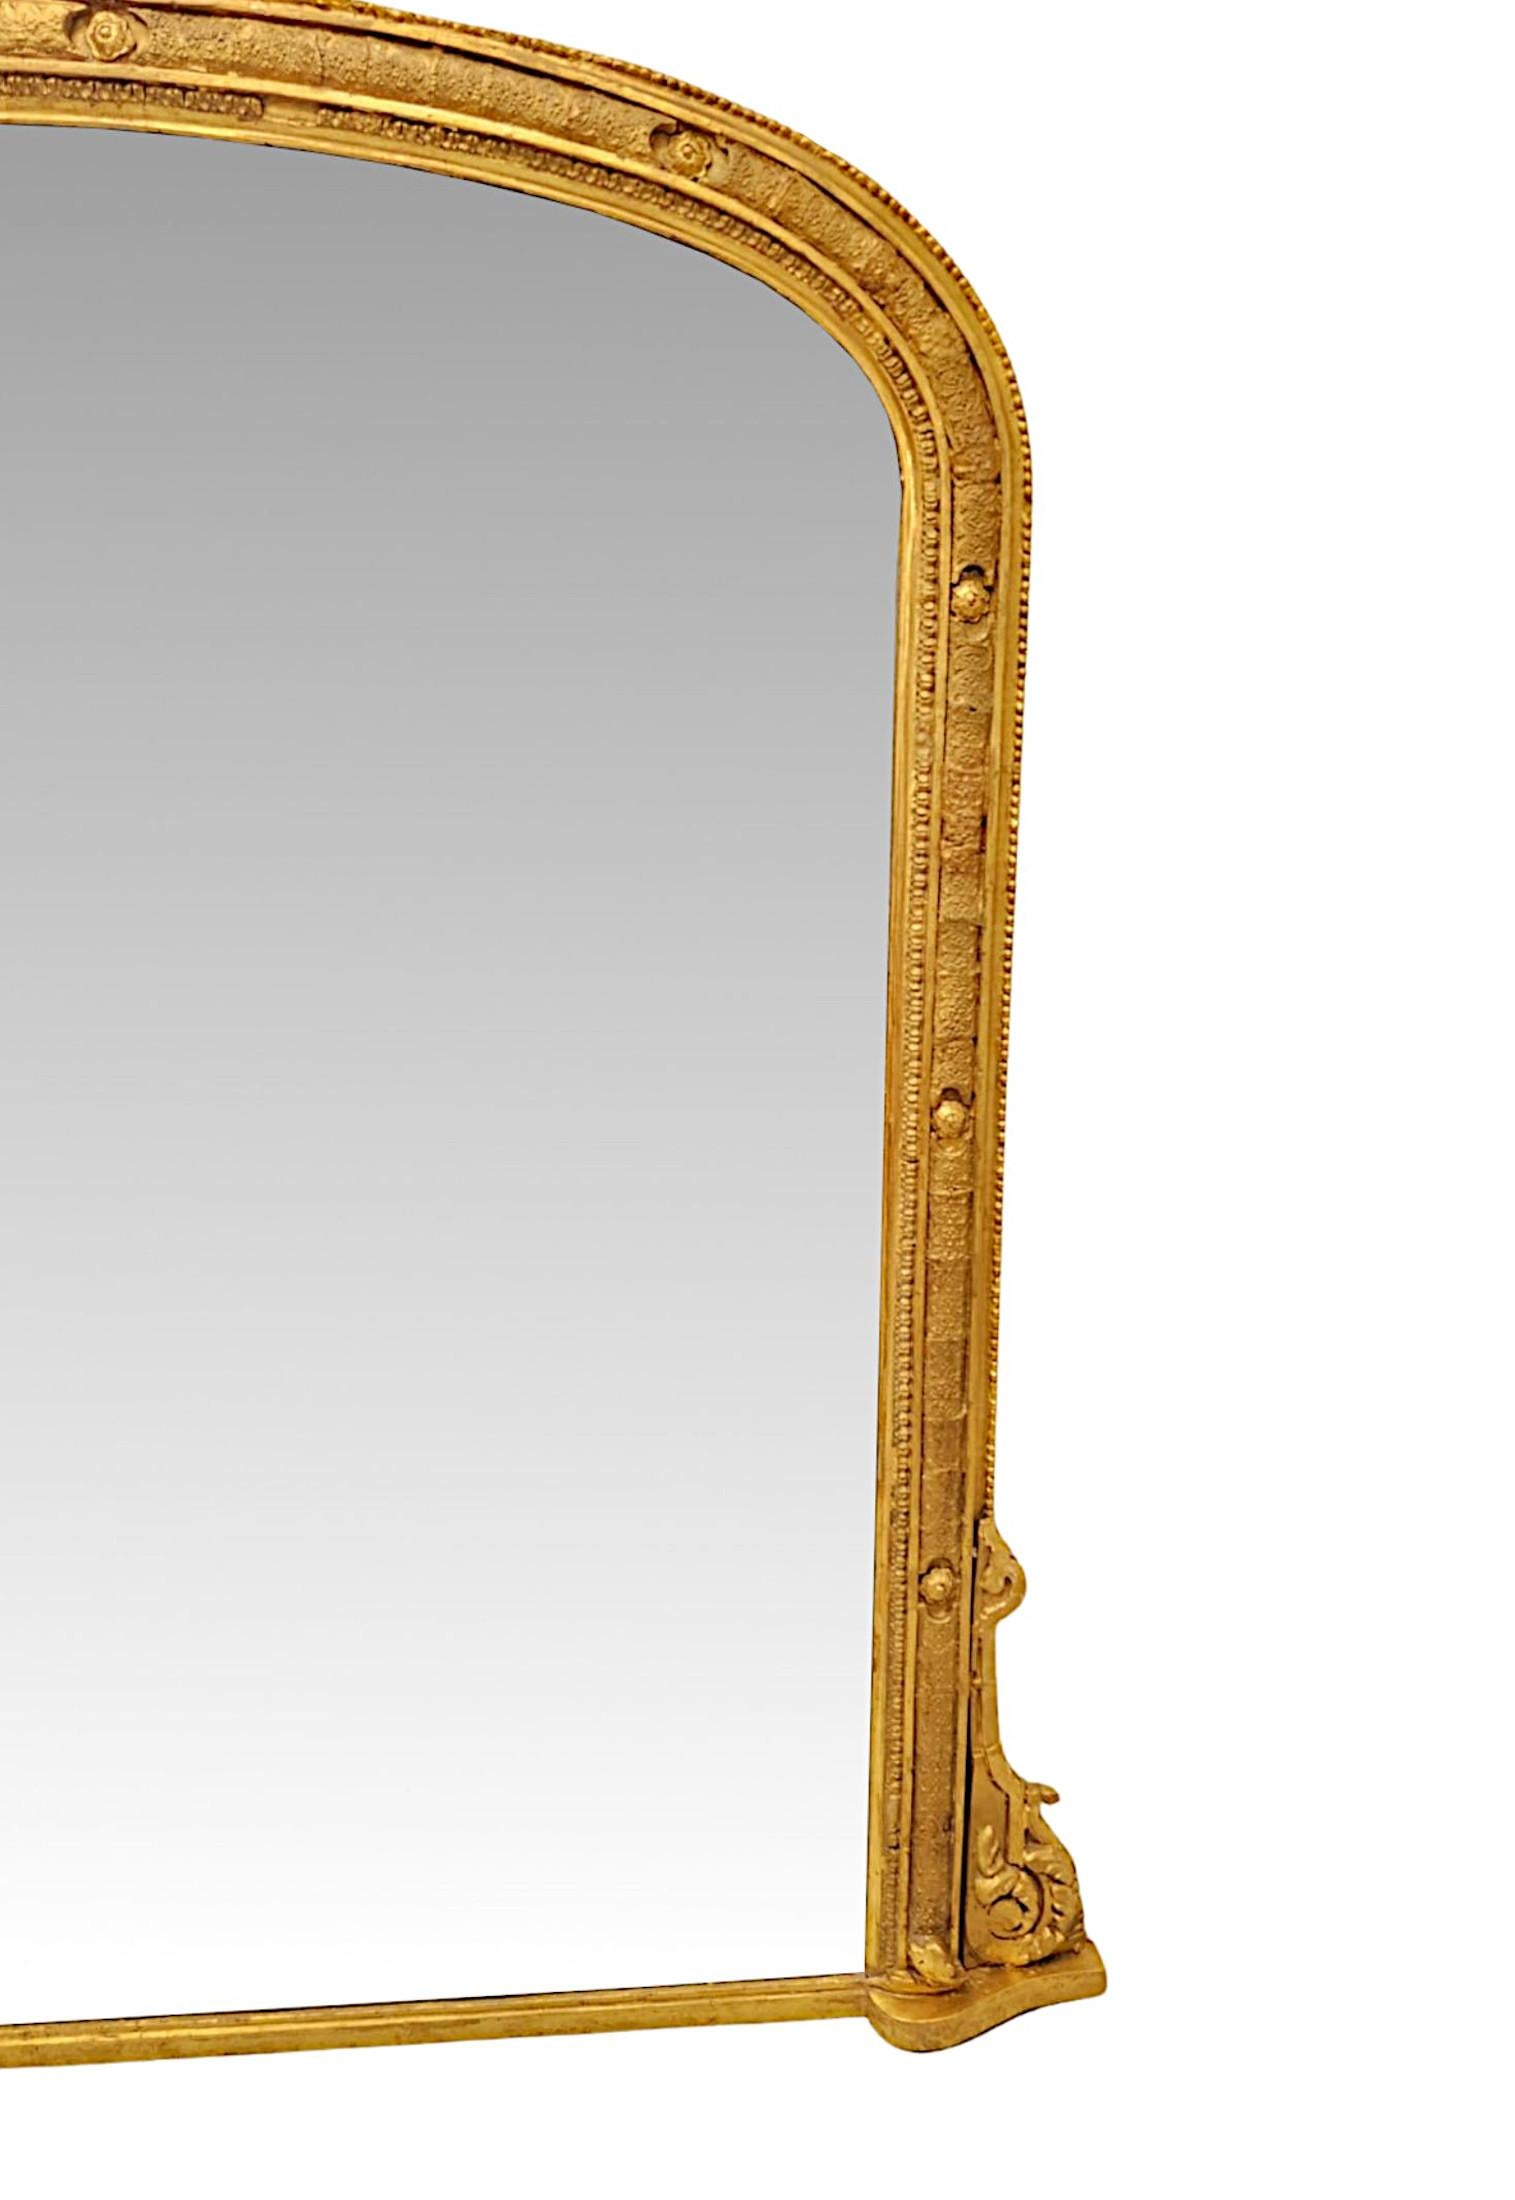 English A Very Fine 19th Century Giltwood Overmantel Mirror For Sale